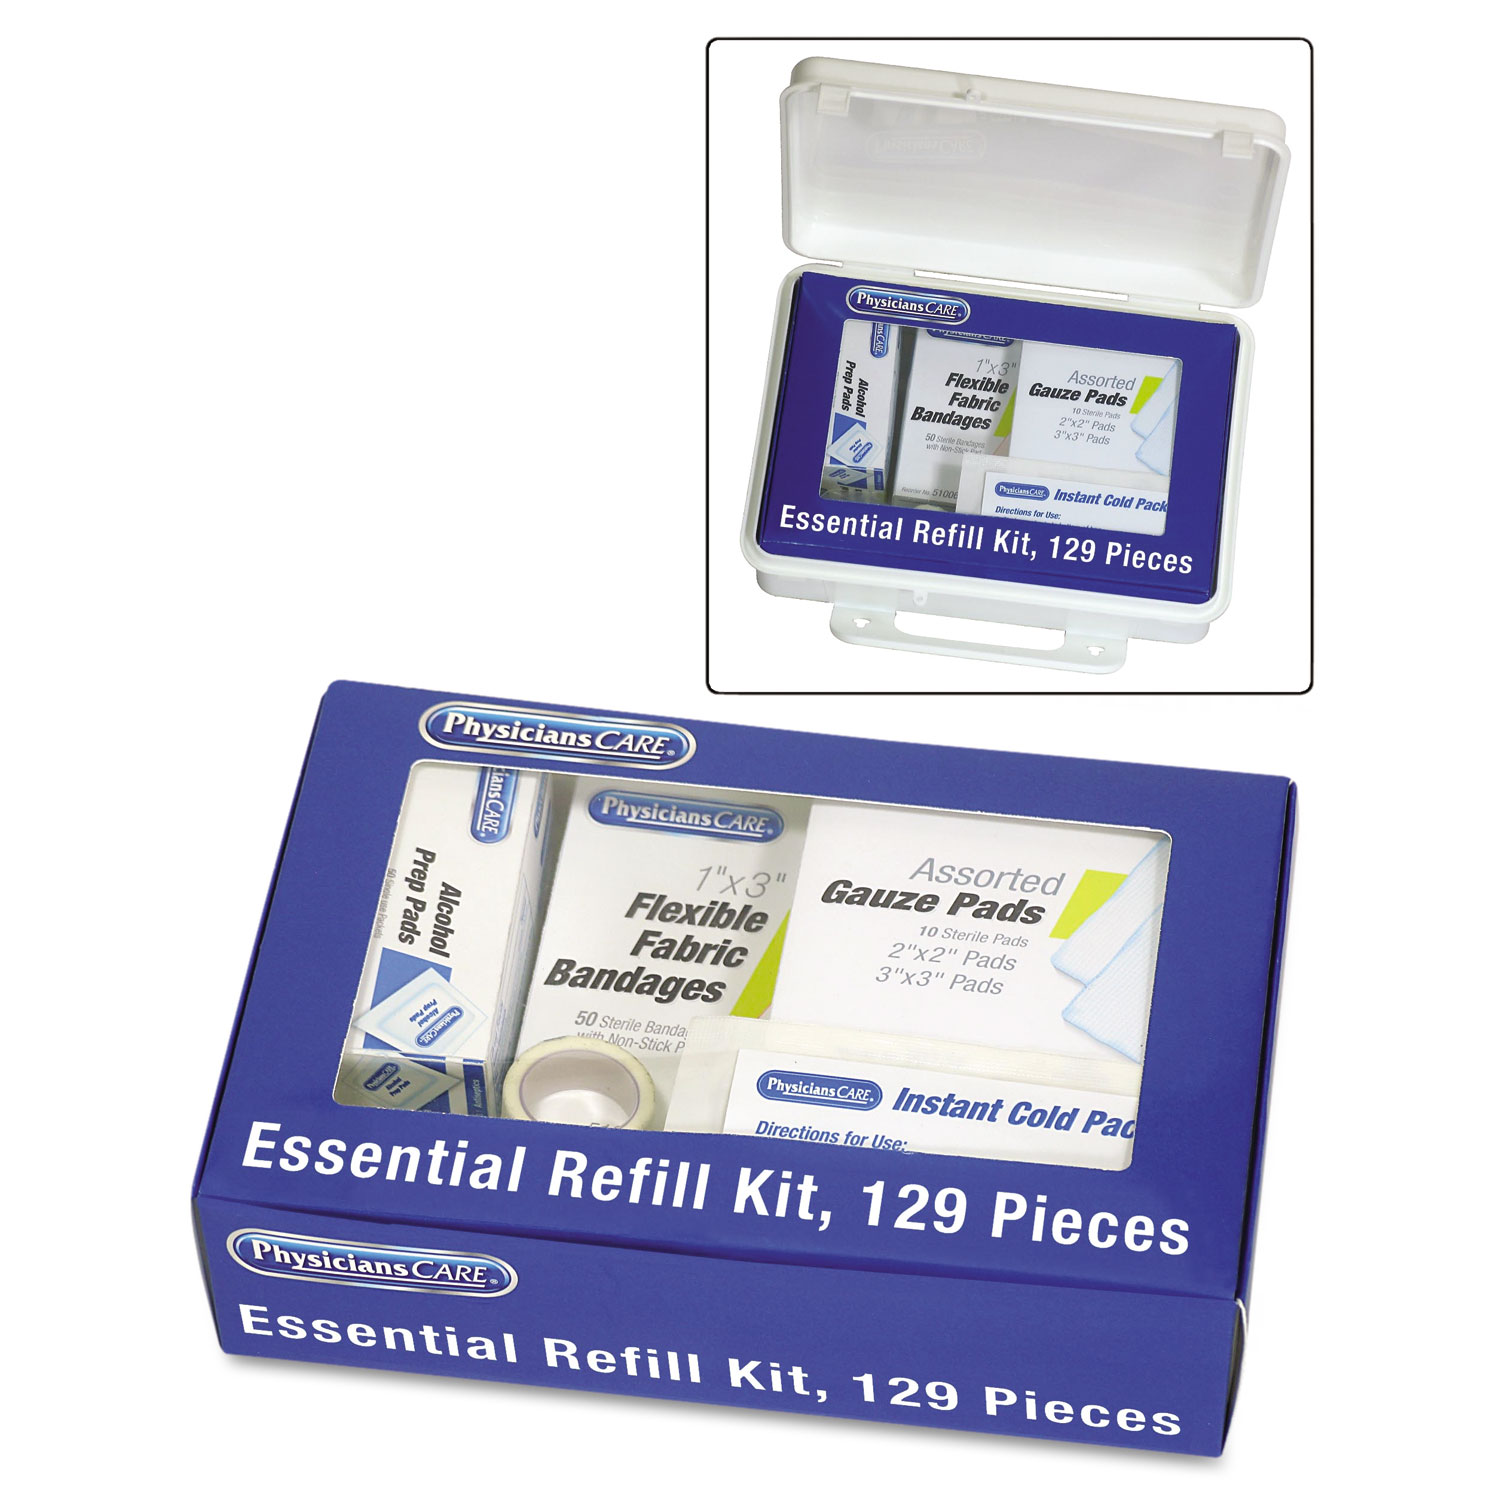  PhysiciansCare by First Aid Only 90137 Essential Refill Kit, 129 Pieces/Kit (FAO90137) 